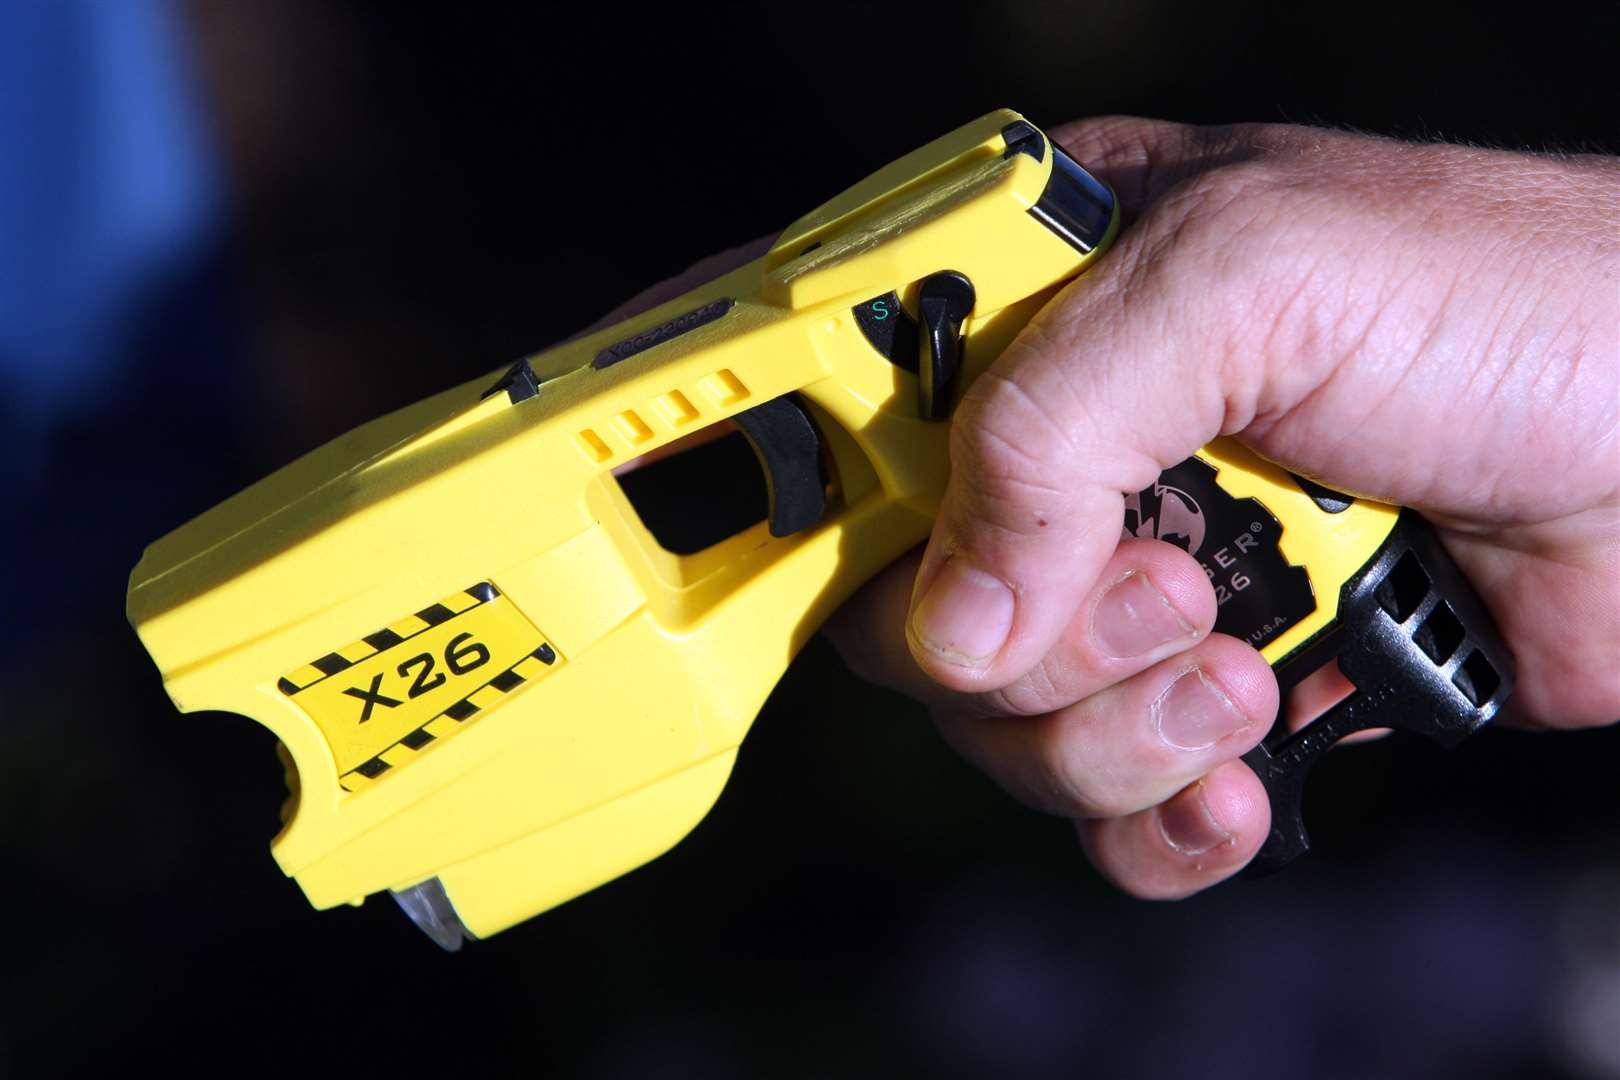 The prosecution allege the men used a taser during the incident